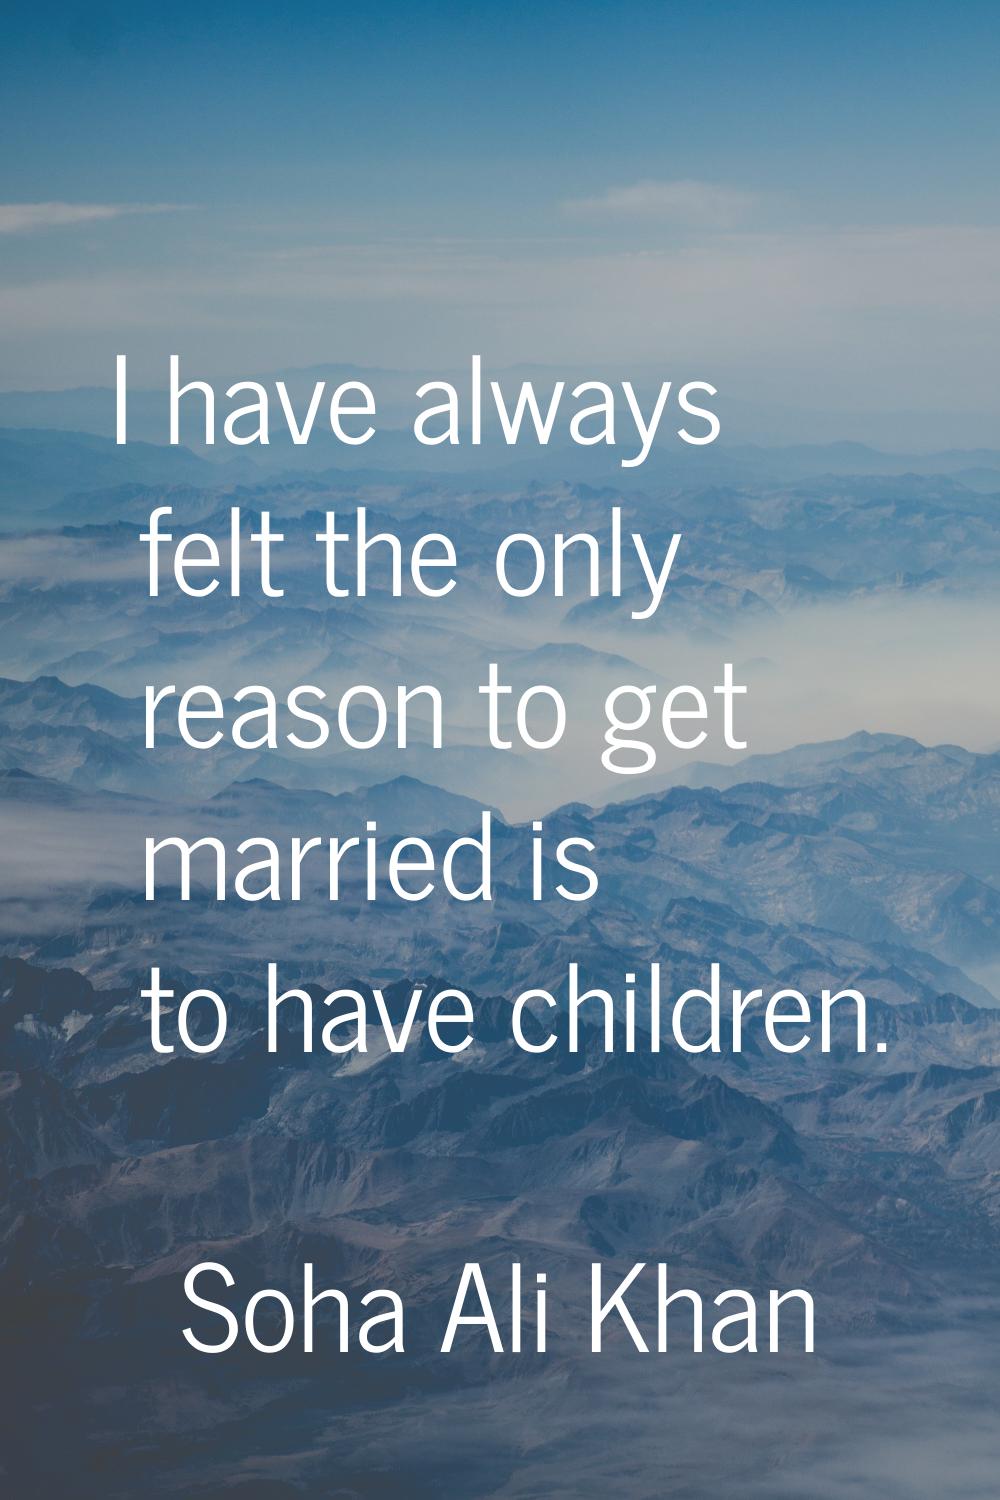 I have always felt the only reason to get married is to have children.